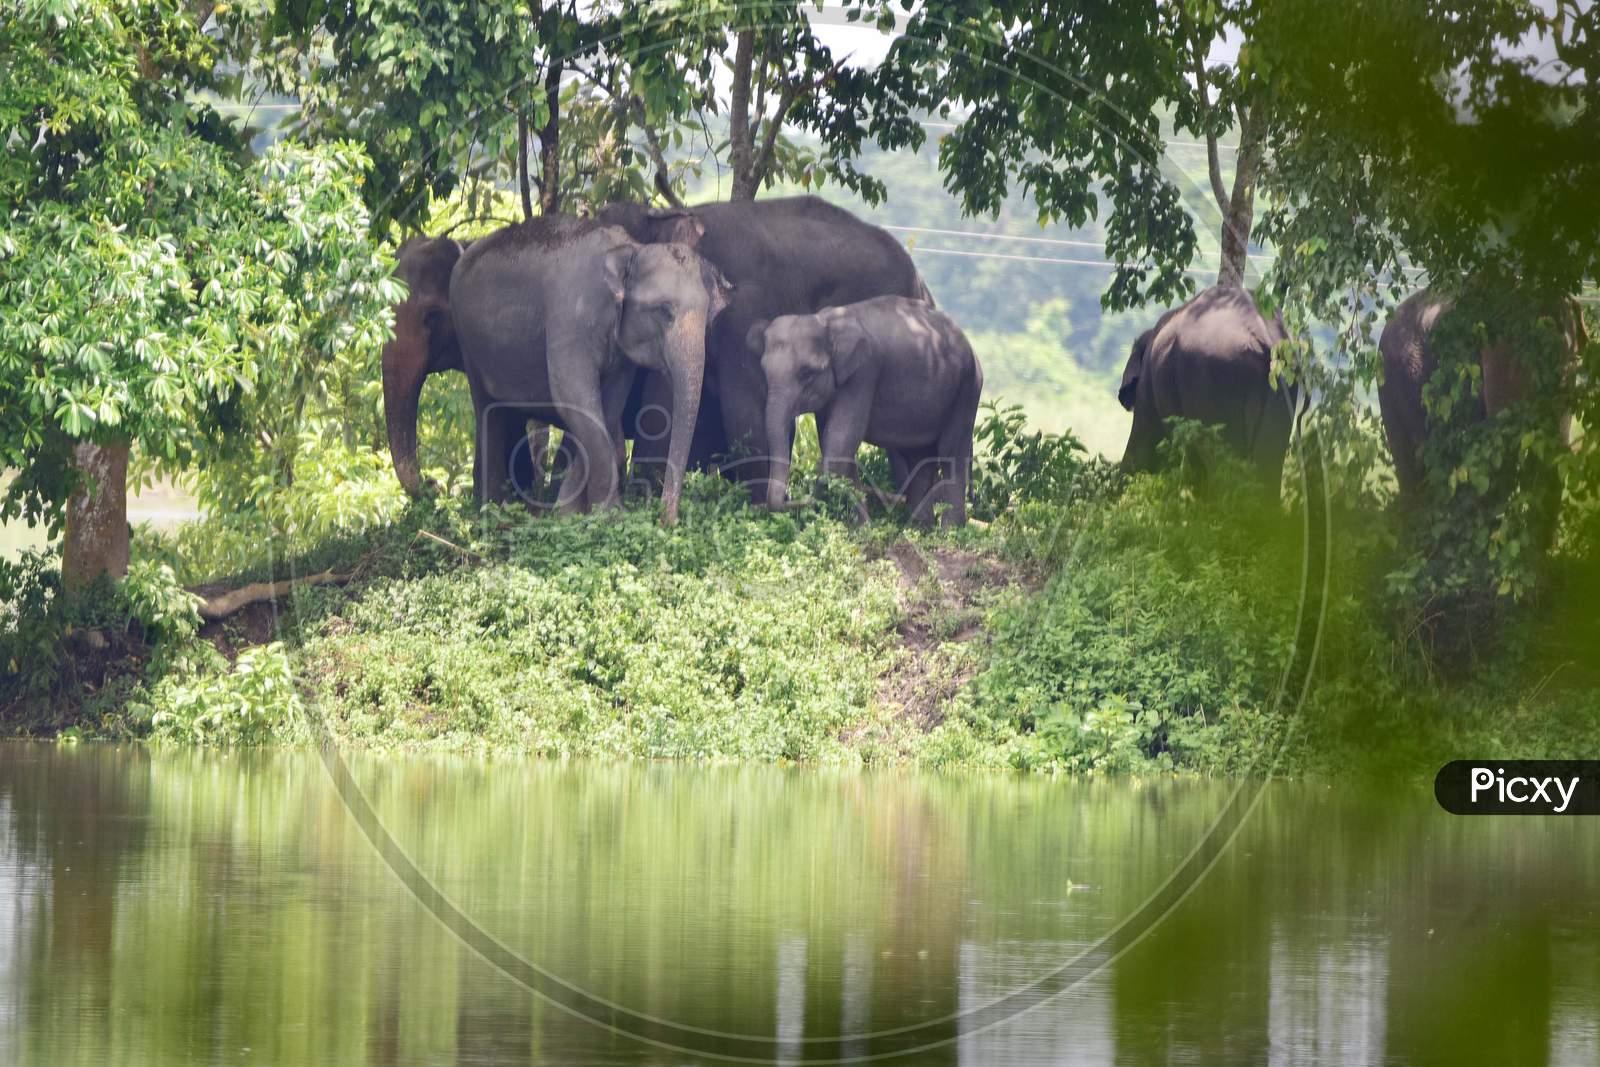 A herd of elephants take shelter at a higher place to escape the floods in Kaziranga National Park in Nagaon, Assam on July 13, 2020